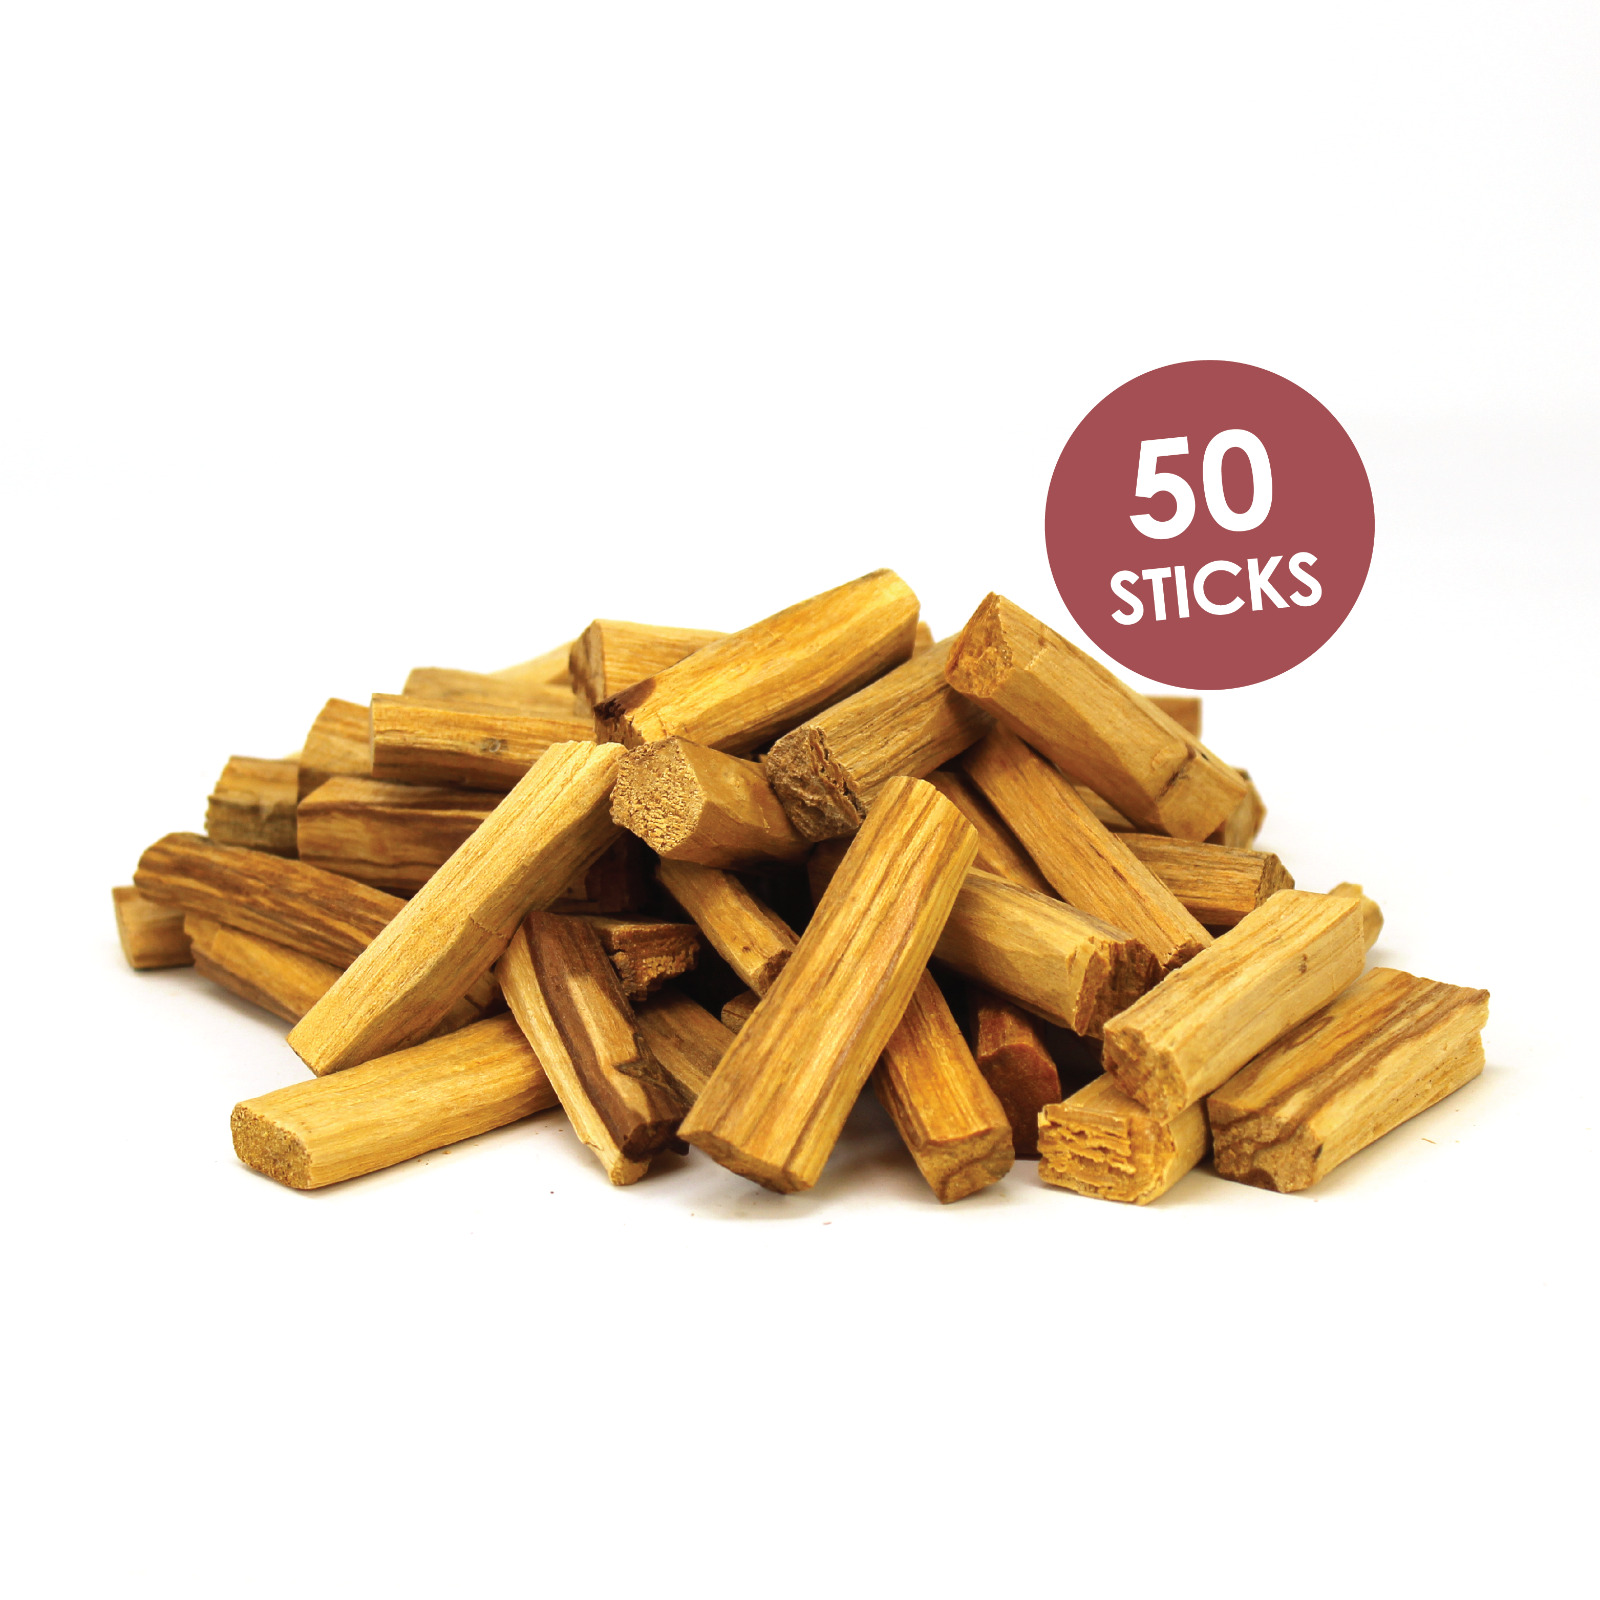 New Palo Santo incense 50 sticks 5cm wood Pequeno by sublimation natural scented